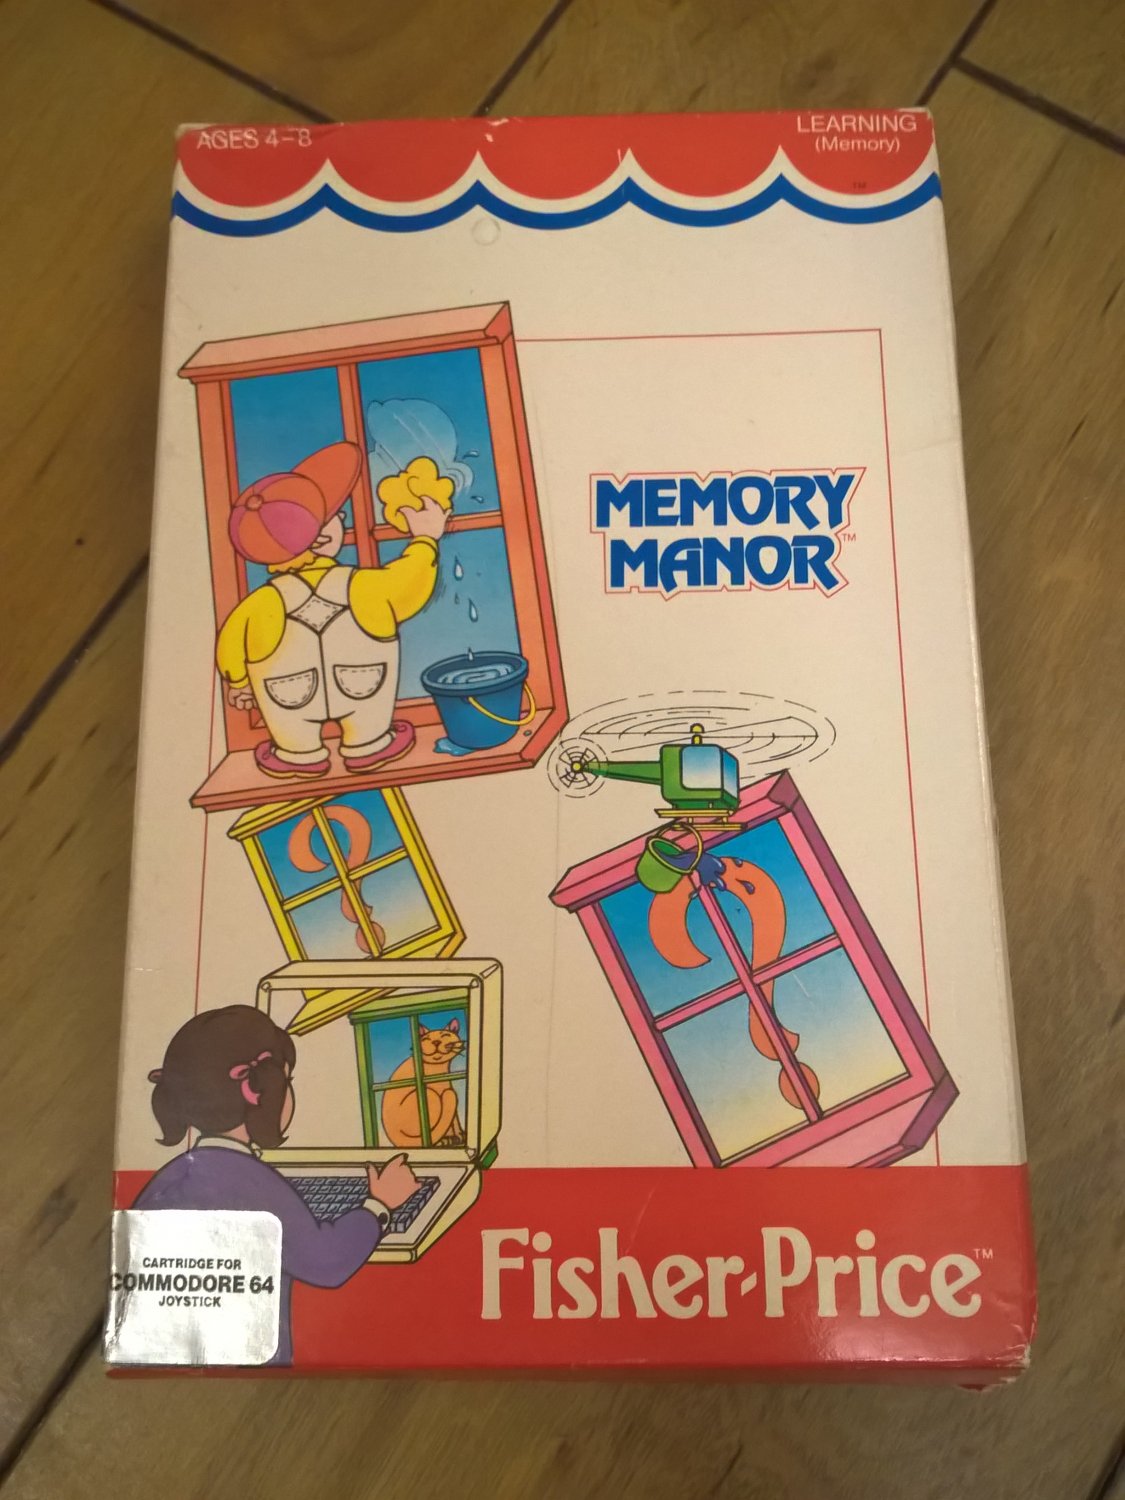 Memory Manor (Cartridge) For Commodore 64 128, NEW OPEN BOX, Fisher-Price